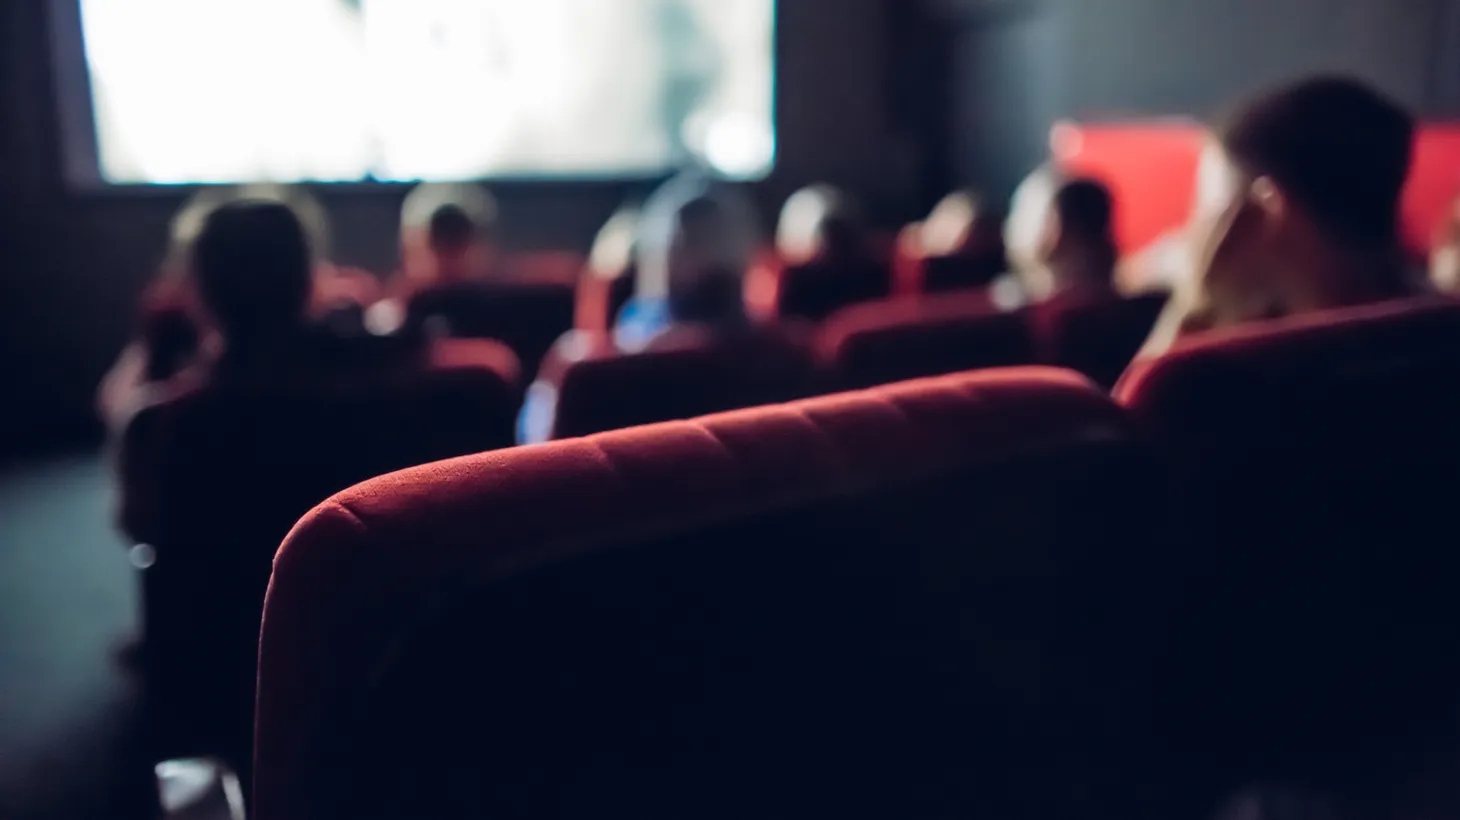 John Fithian, former National Association of Theatre Owners CEO: “A theatrical release with a robust period of exclusivity is better for the business models - both the theatrical release and the streaming release.”